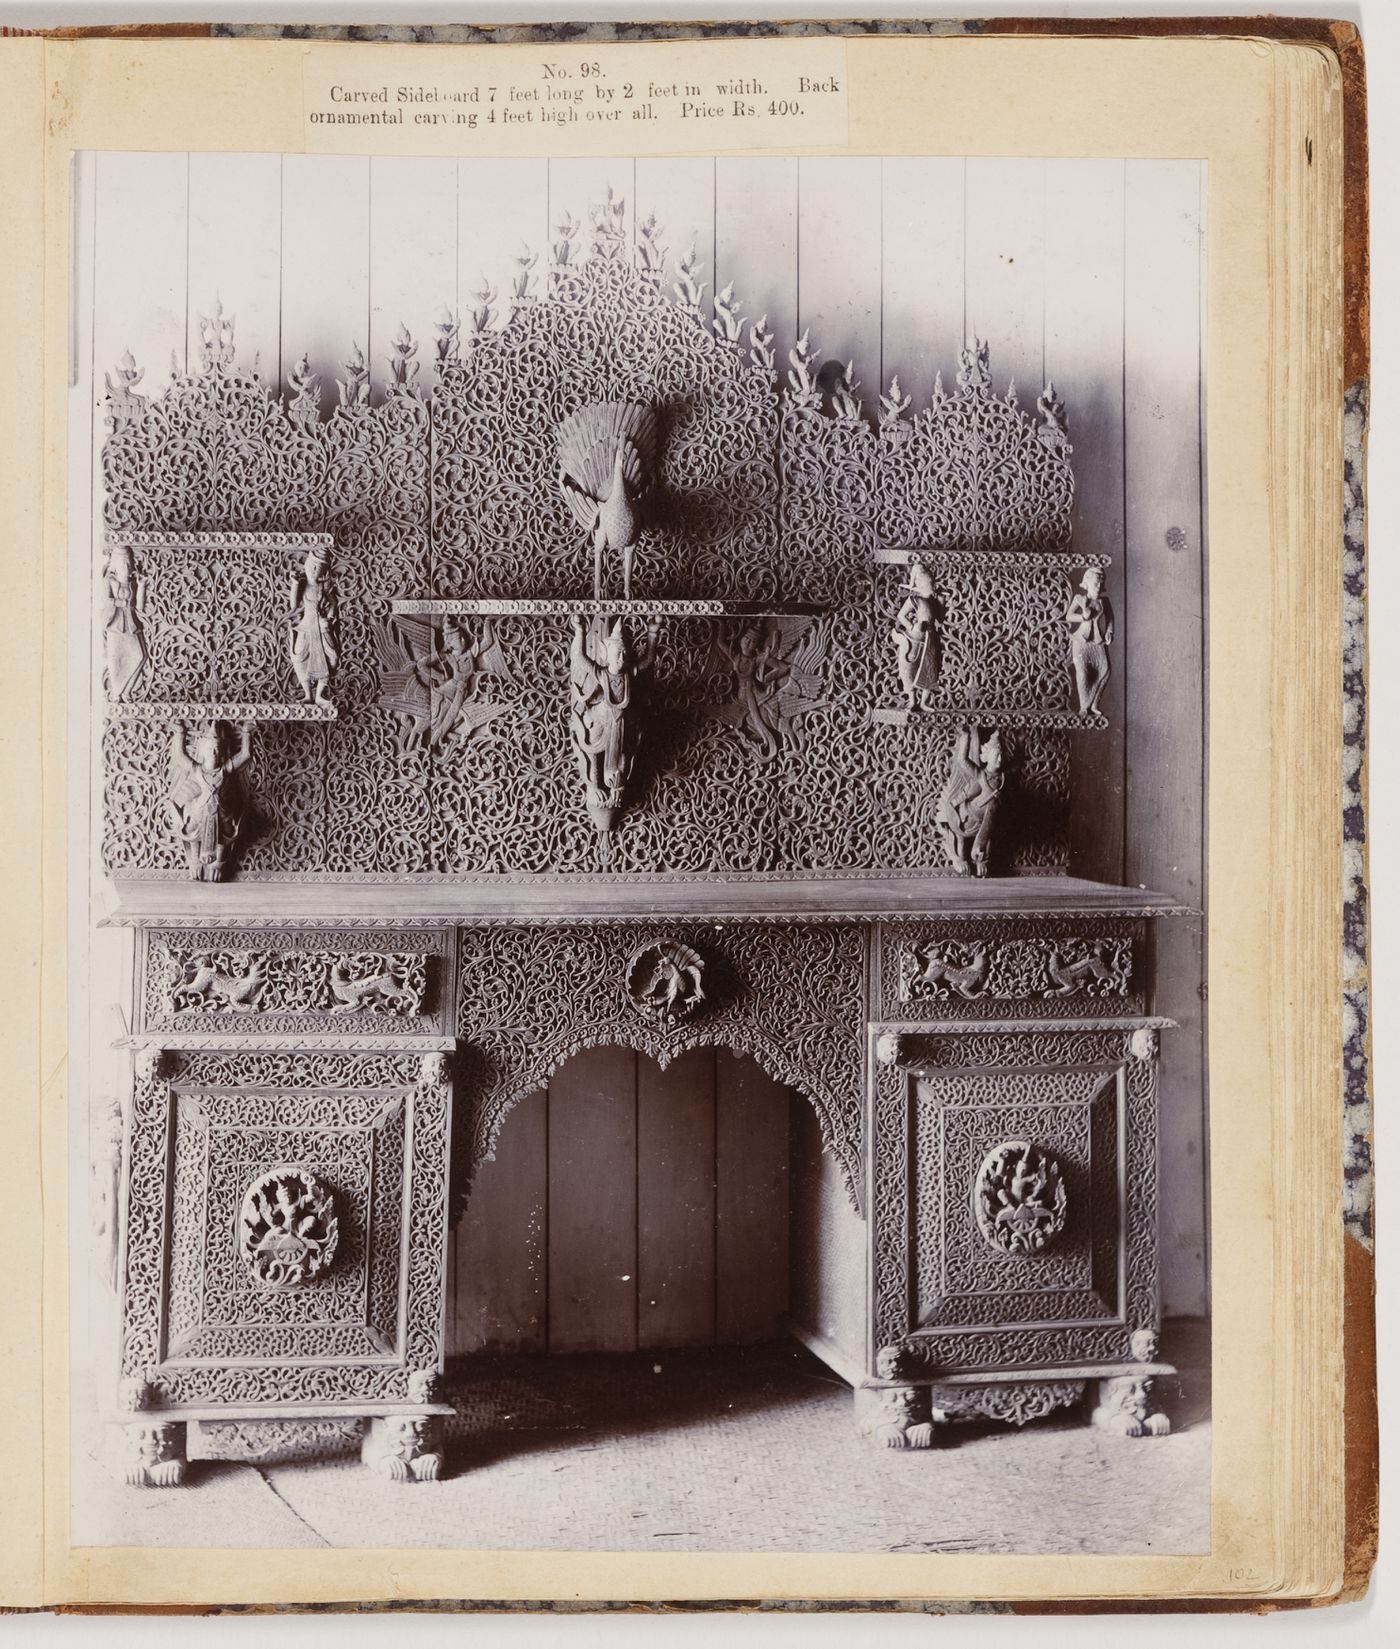 View of a sideboard, F. Beato Limited, C Road, Mandalay, Burma (now Myanmar)